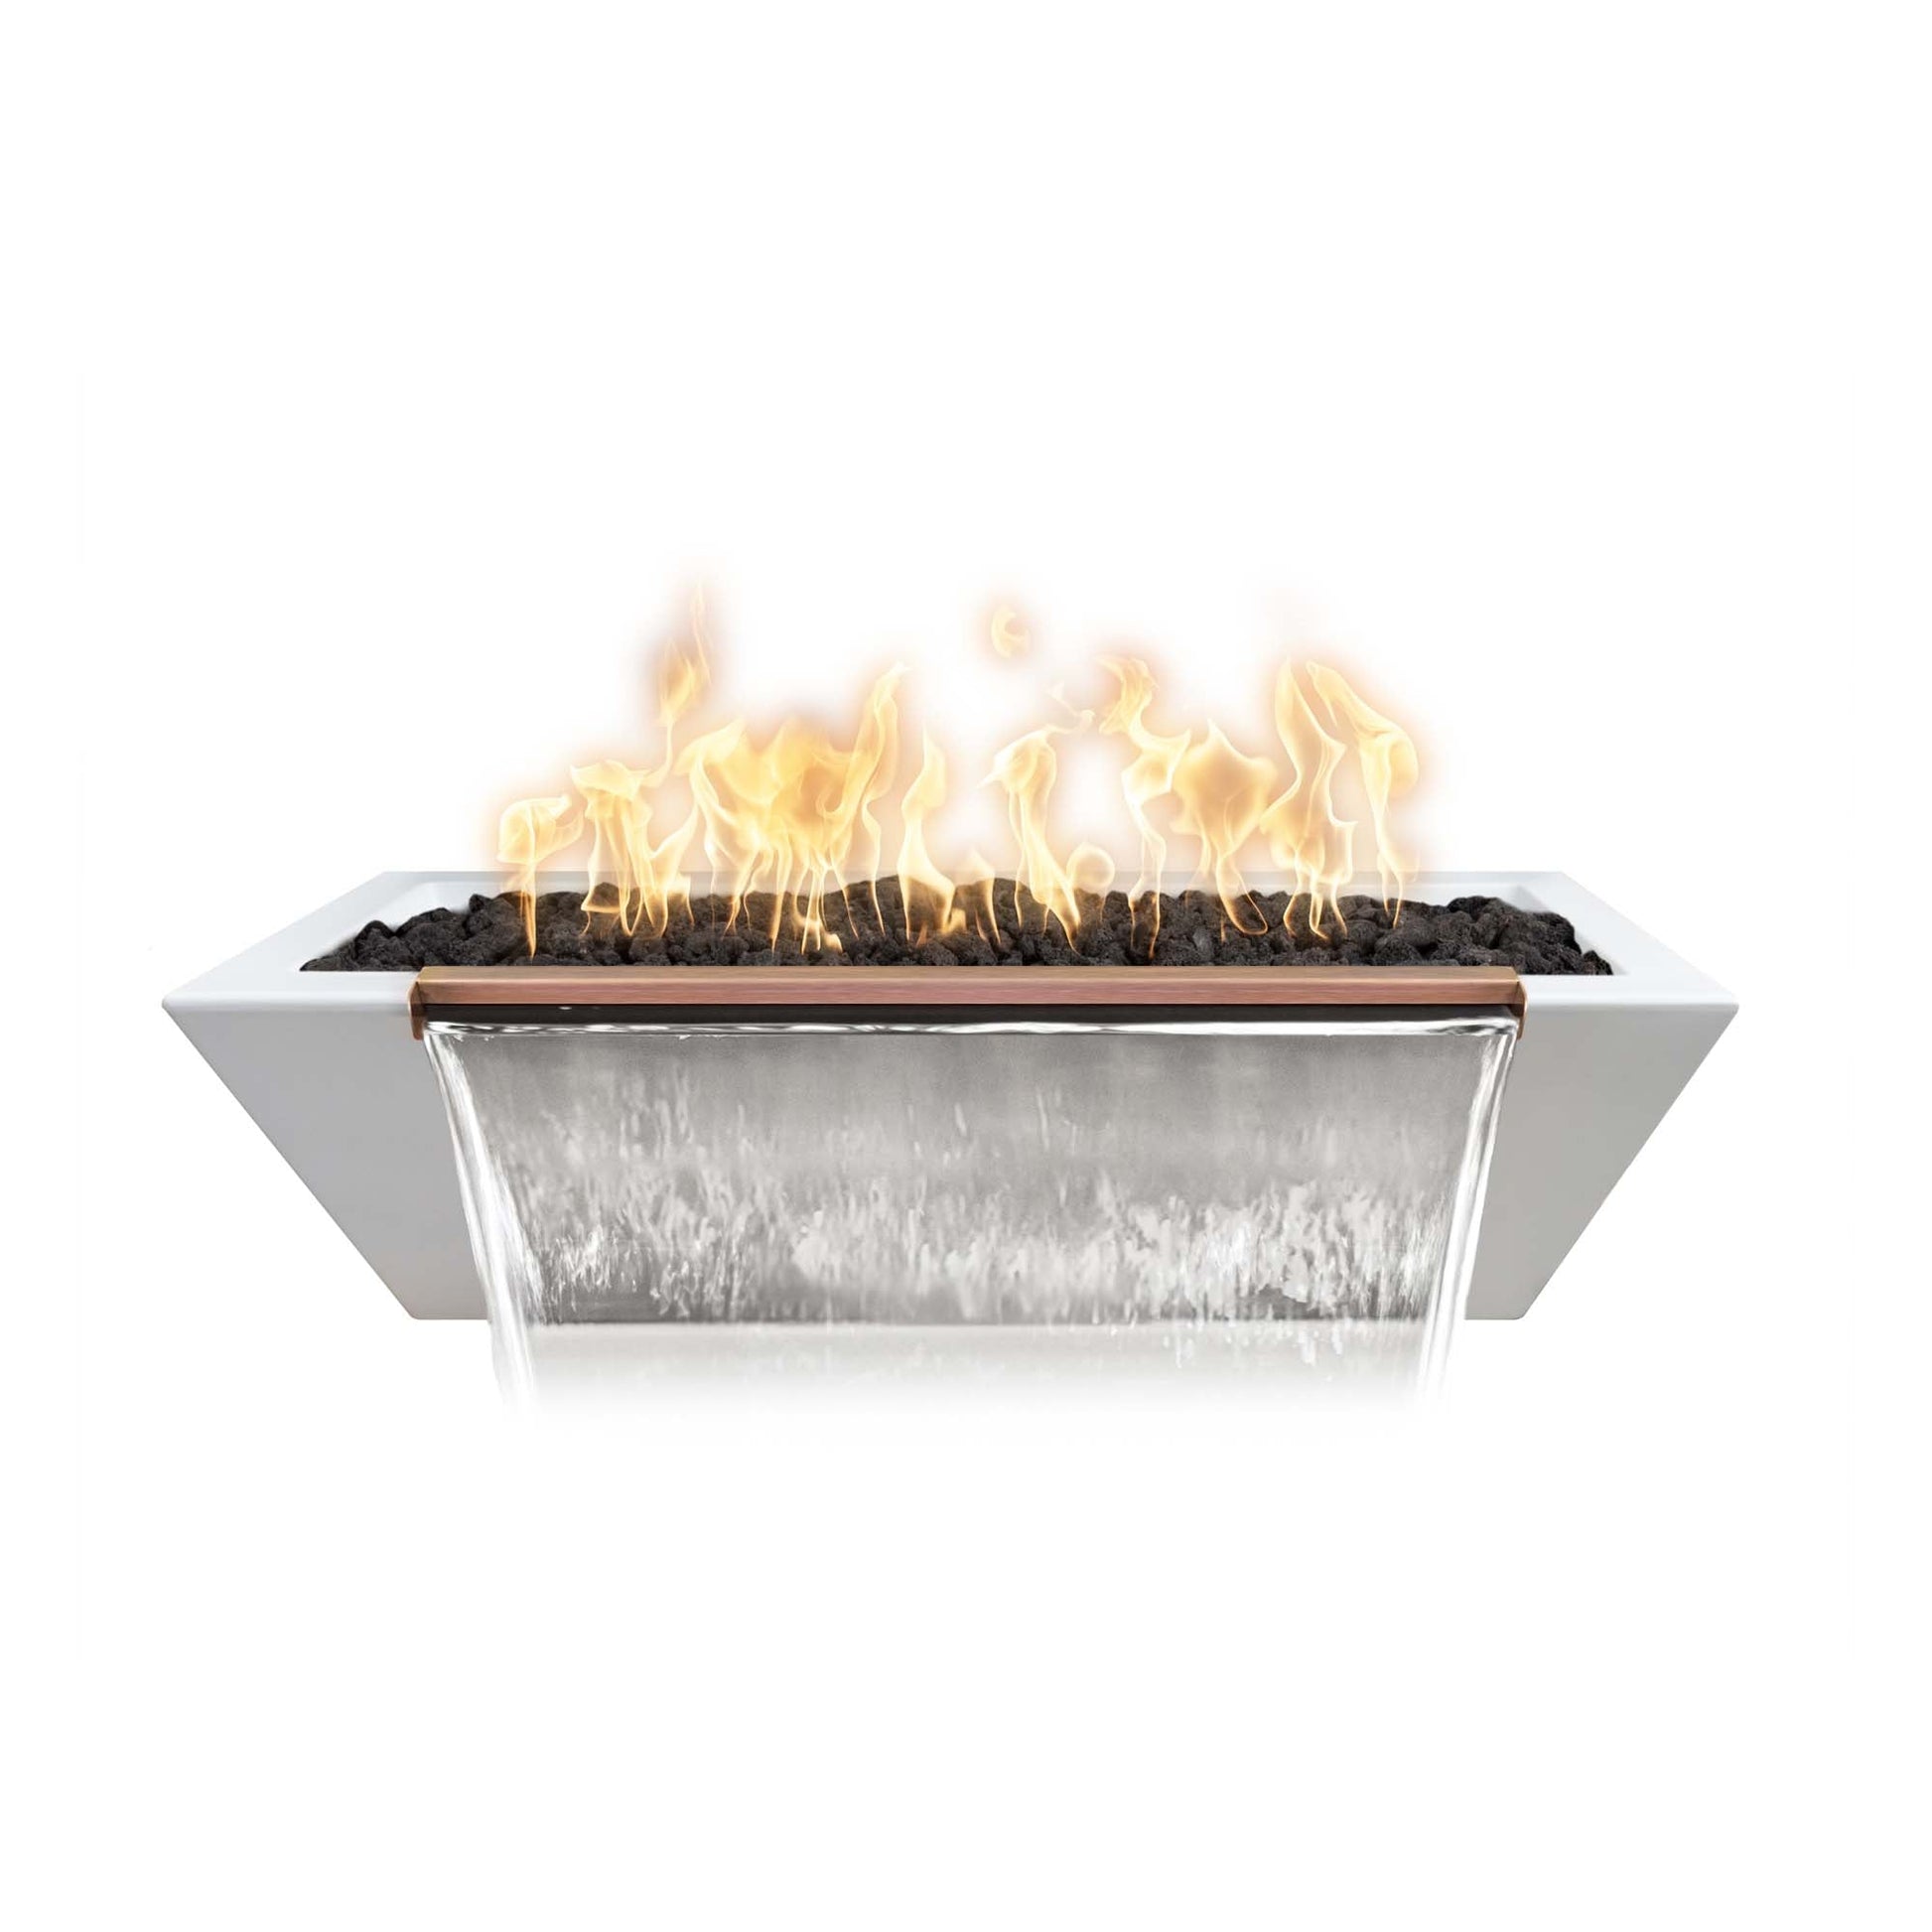 The Outdoor Plus Linear Maya 72" Rustic Moss Stone GFRC Concrete Natural Gas Fire & Water Bowl with Match Lit Ignition